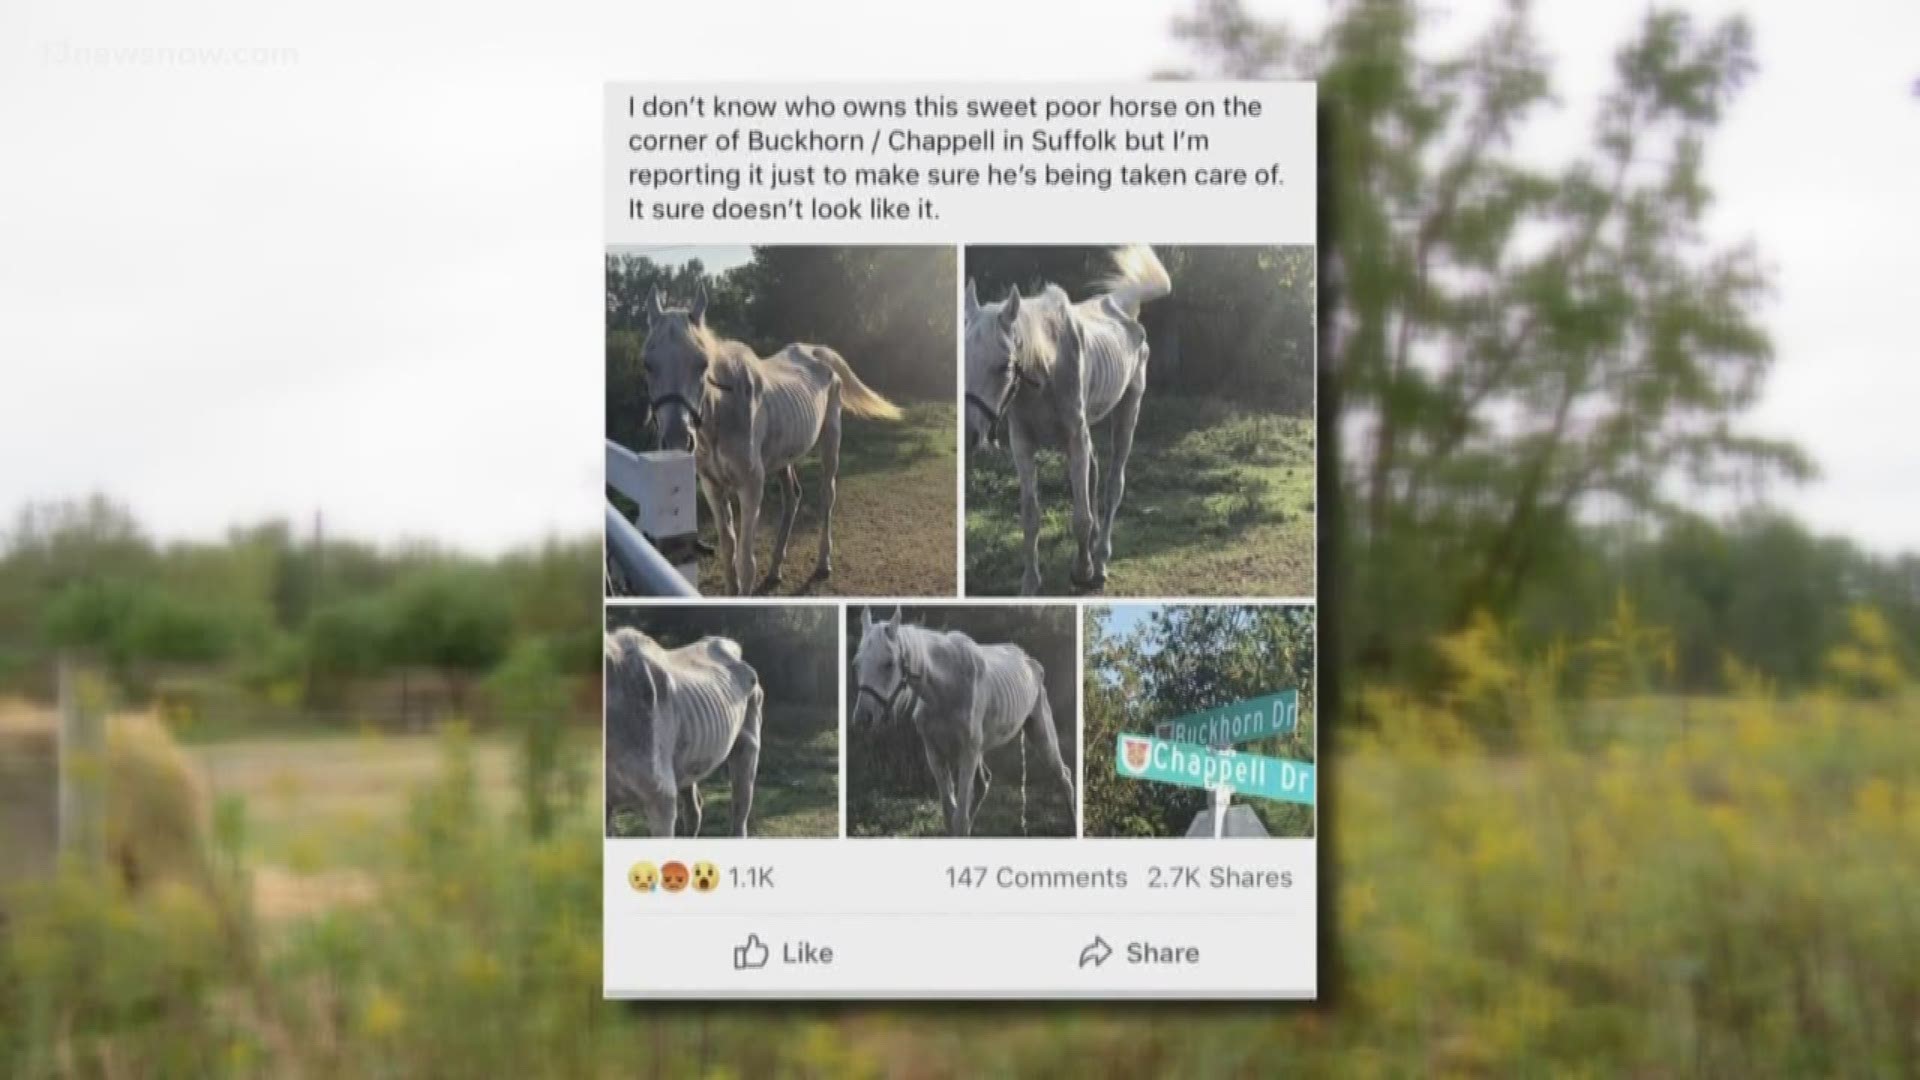 After photos circulated on social media of an emaciated white horse in Suffolk, police said the horse was under care for a medical issue, not abuse.